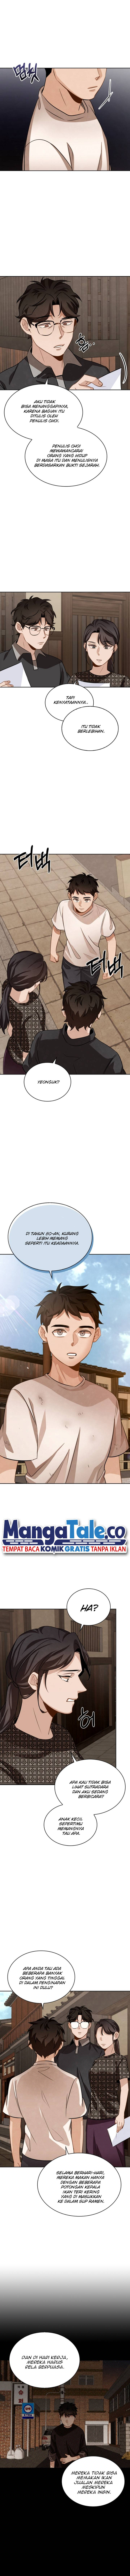 Be the Actor Chapter 13 Bahasa Indonesia